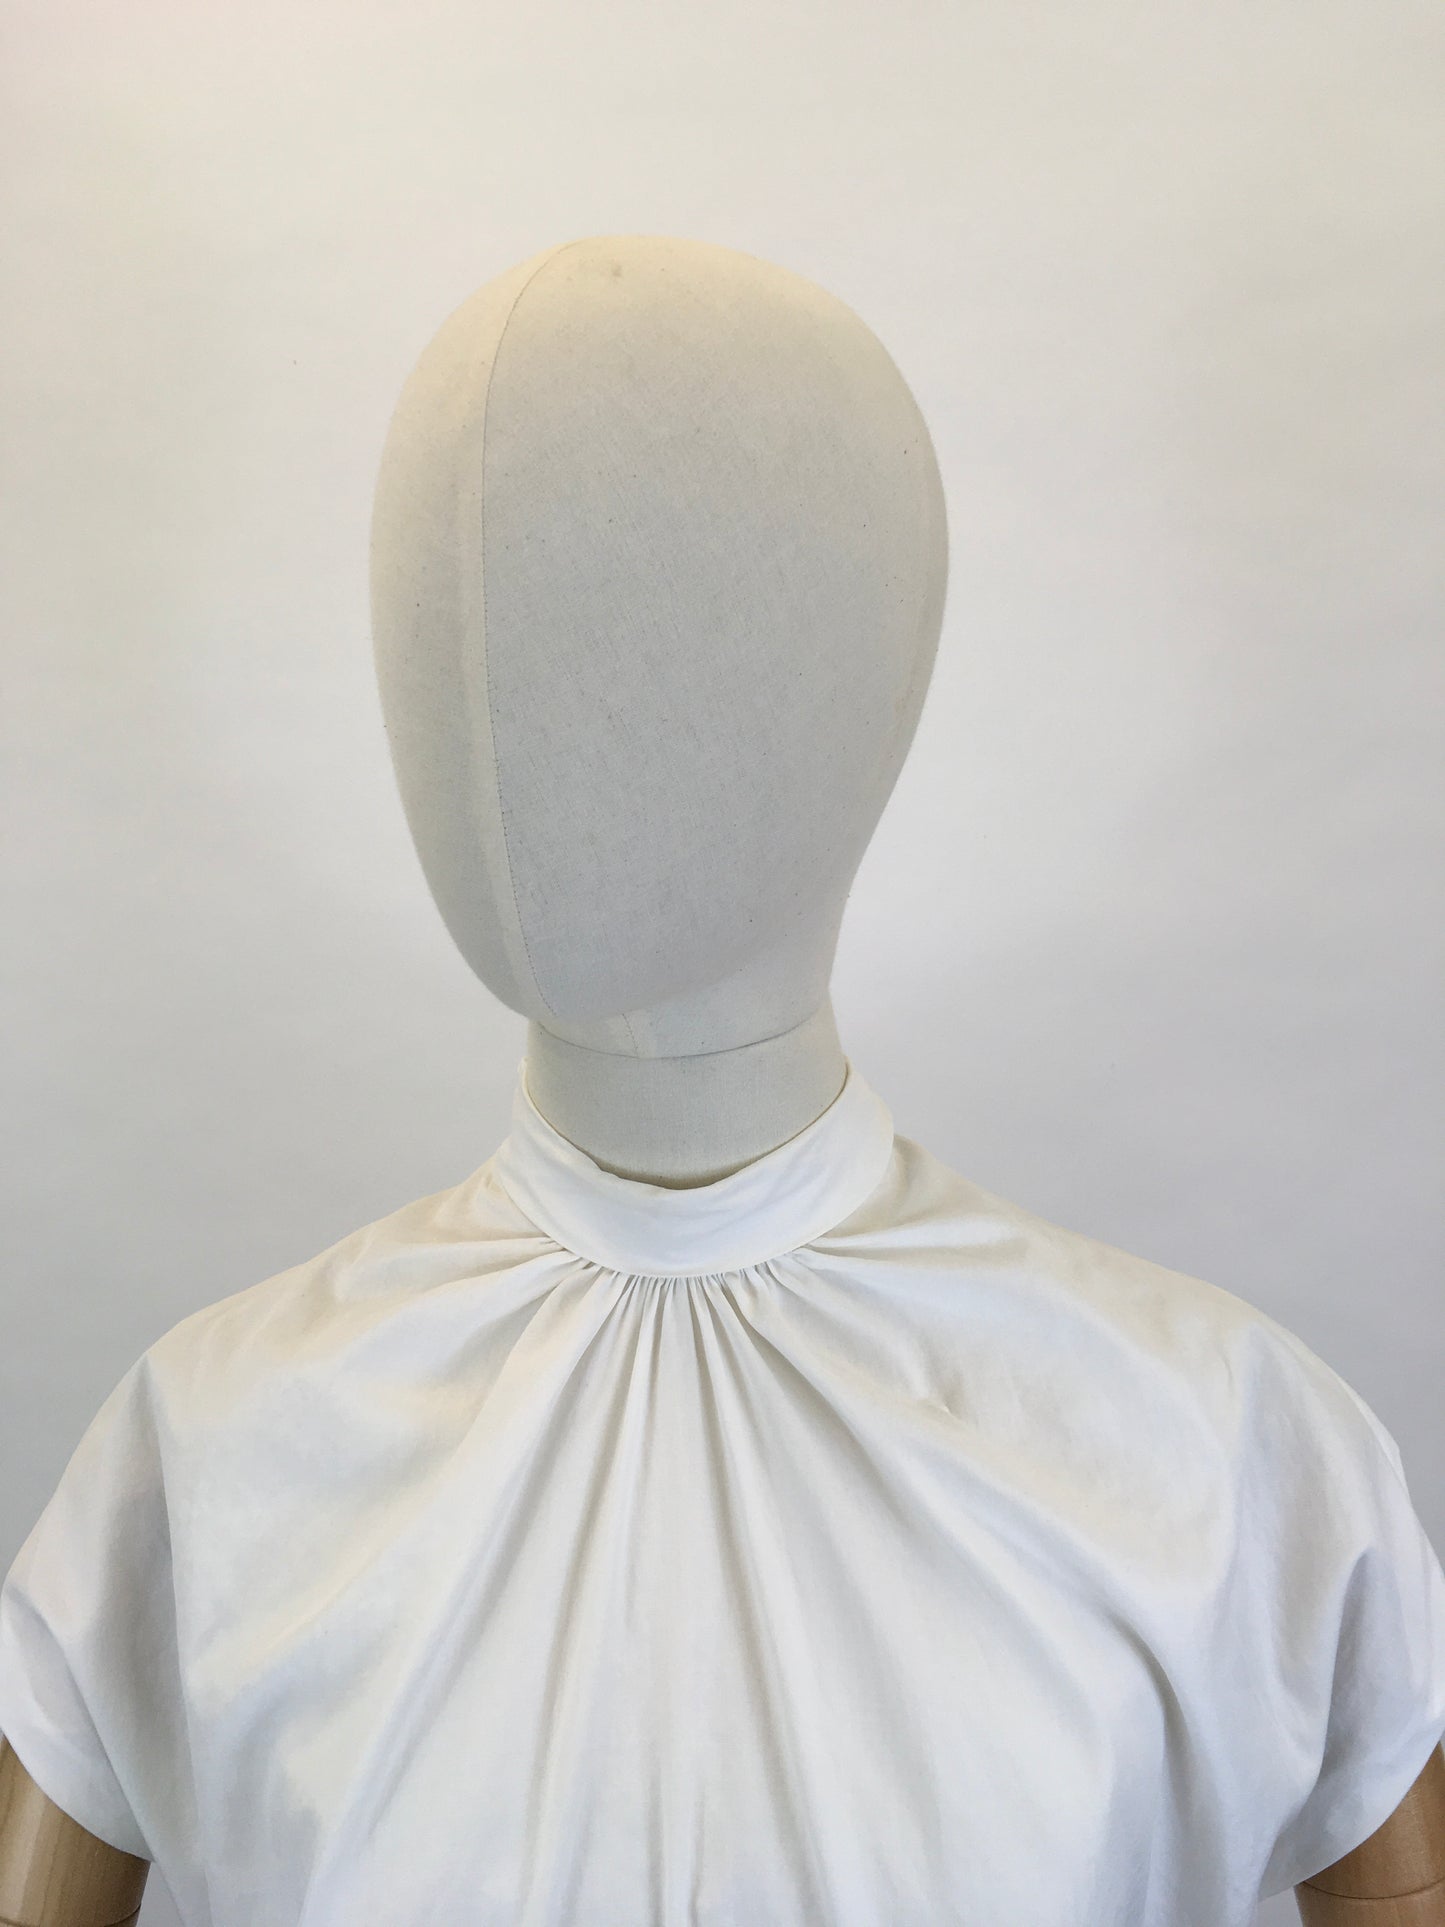 Original 1950’s High Neck Blouse - Made From A Crisp White Cotton